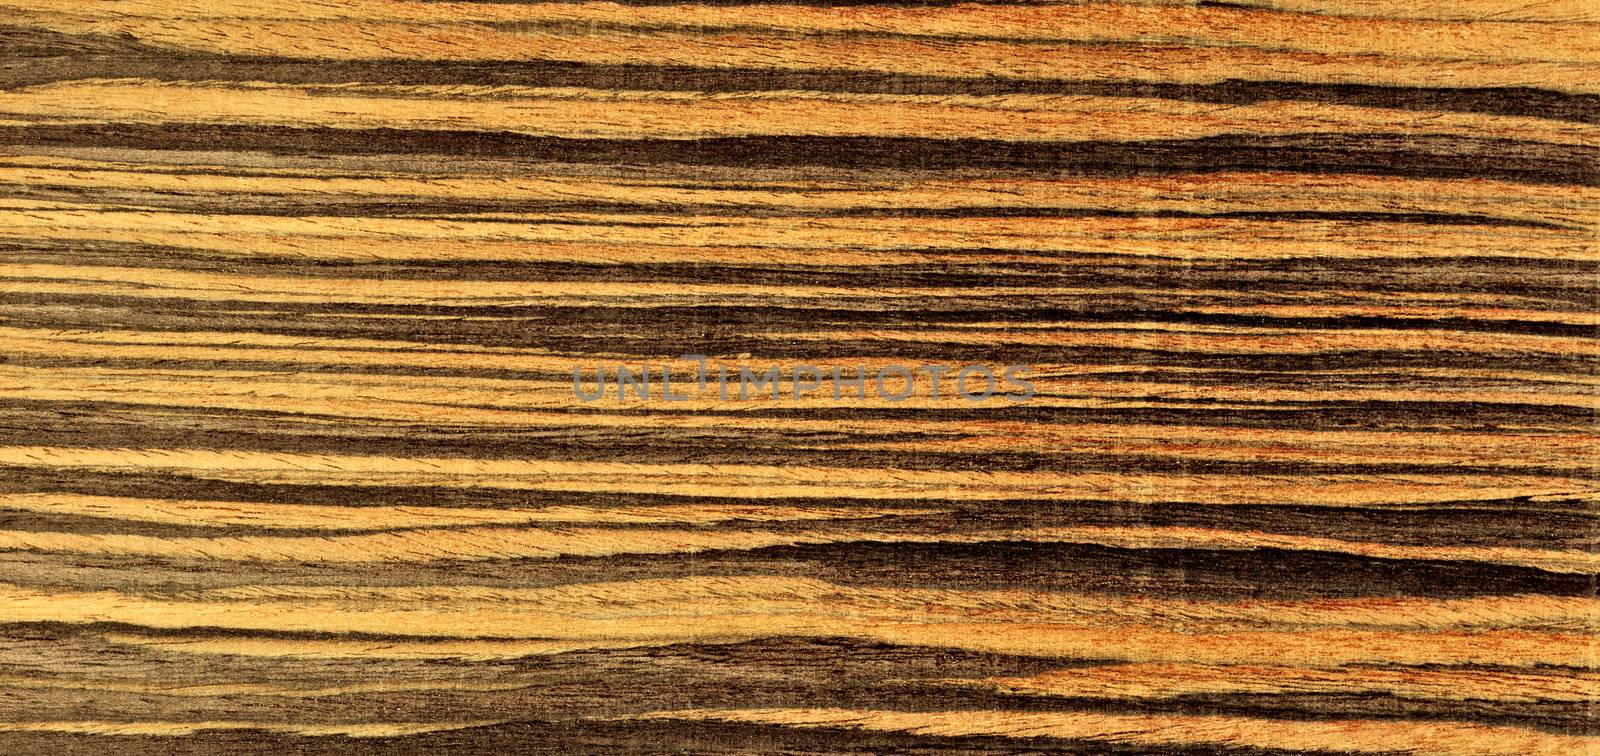 Wood texture close-up background by ozaiachin